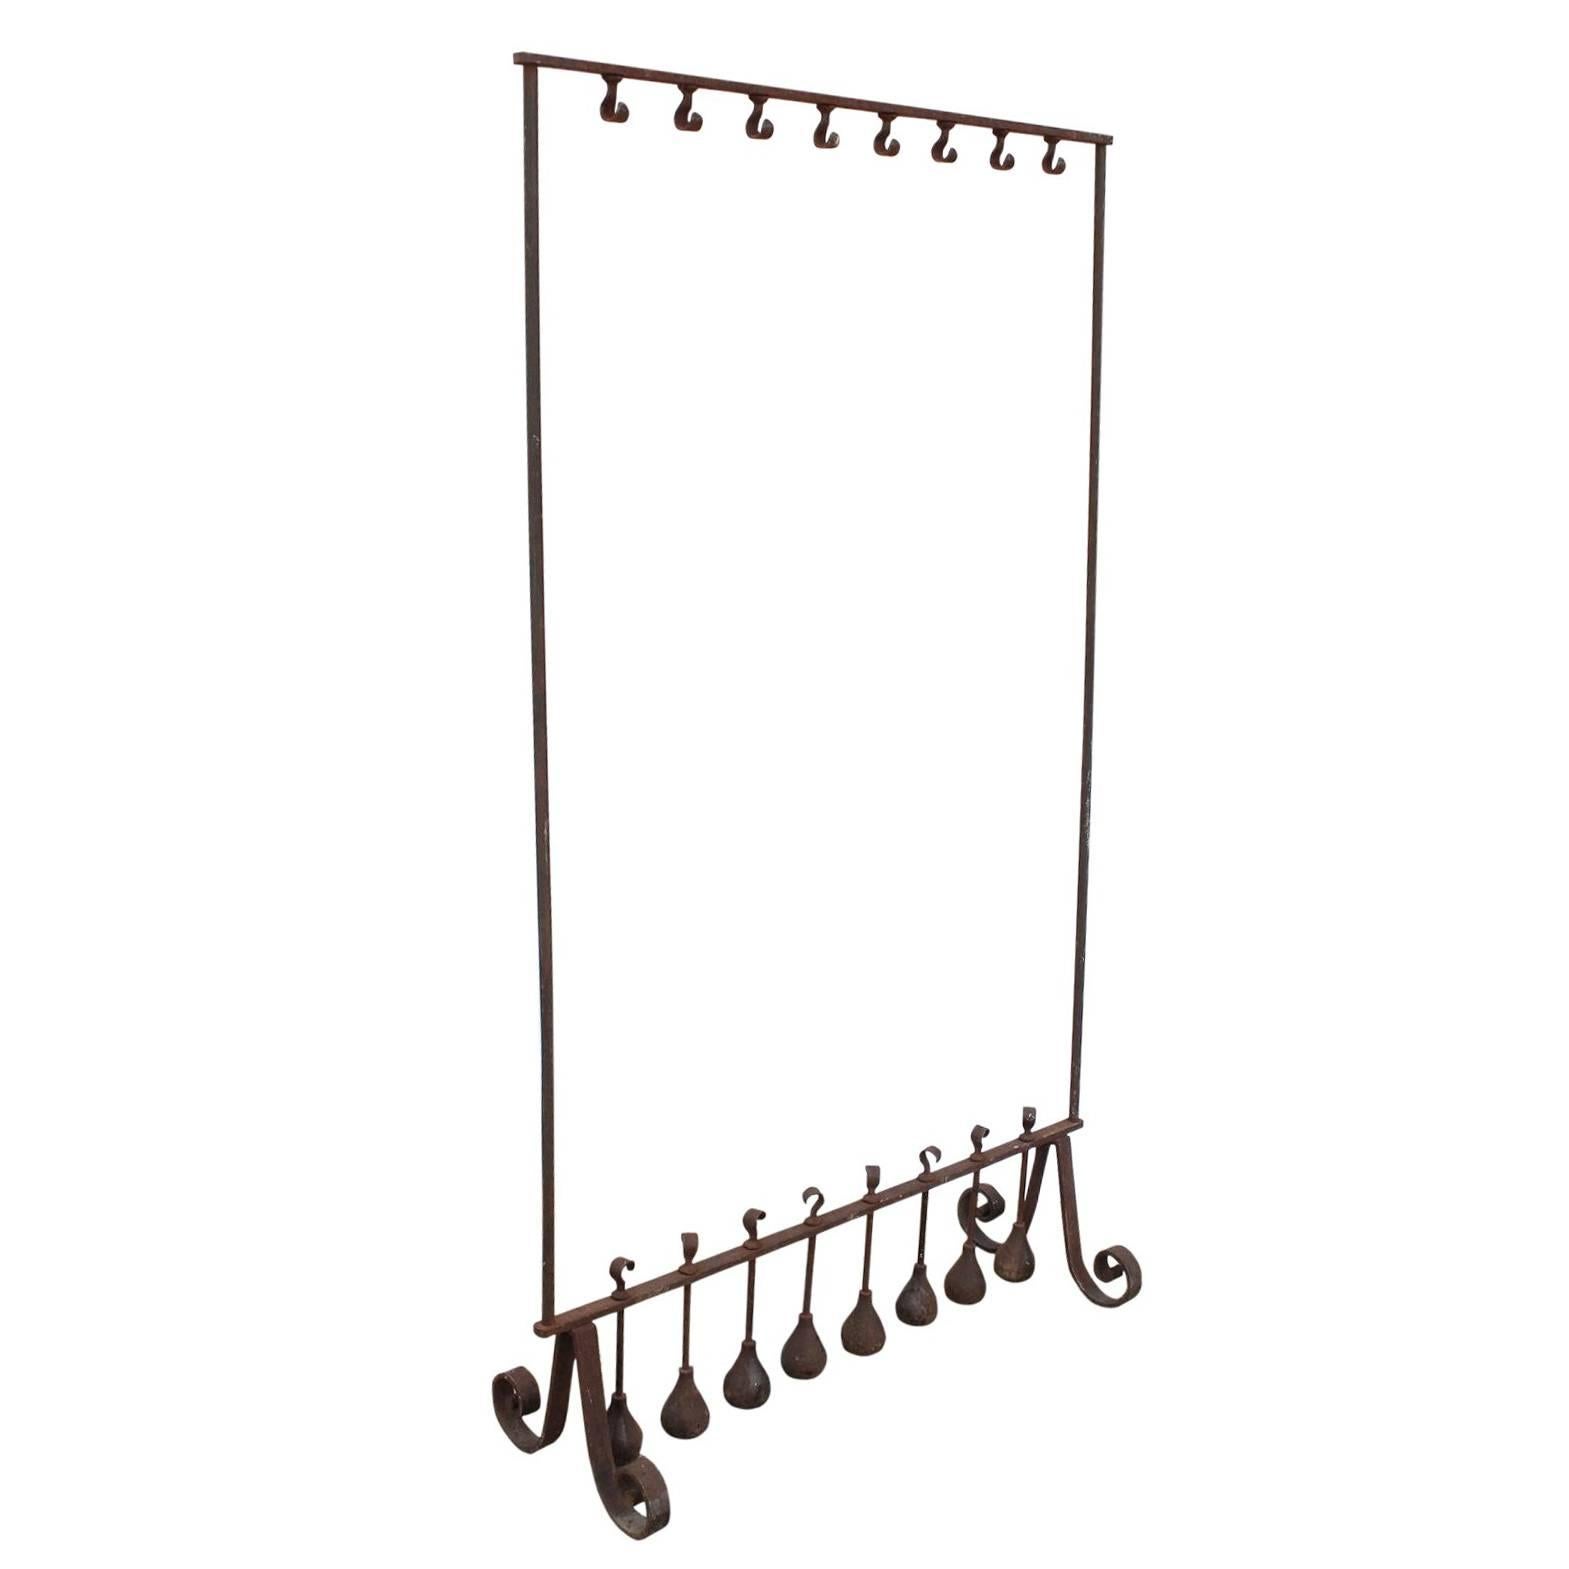 Antique Wrought Iron Free Standing Coat Rack For Sale